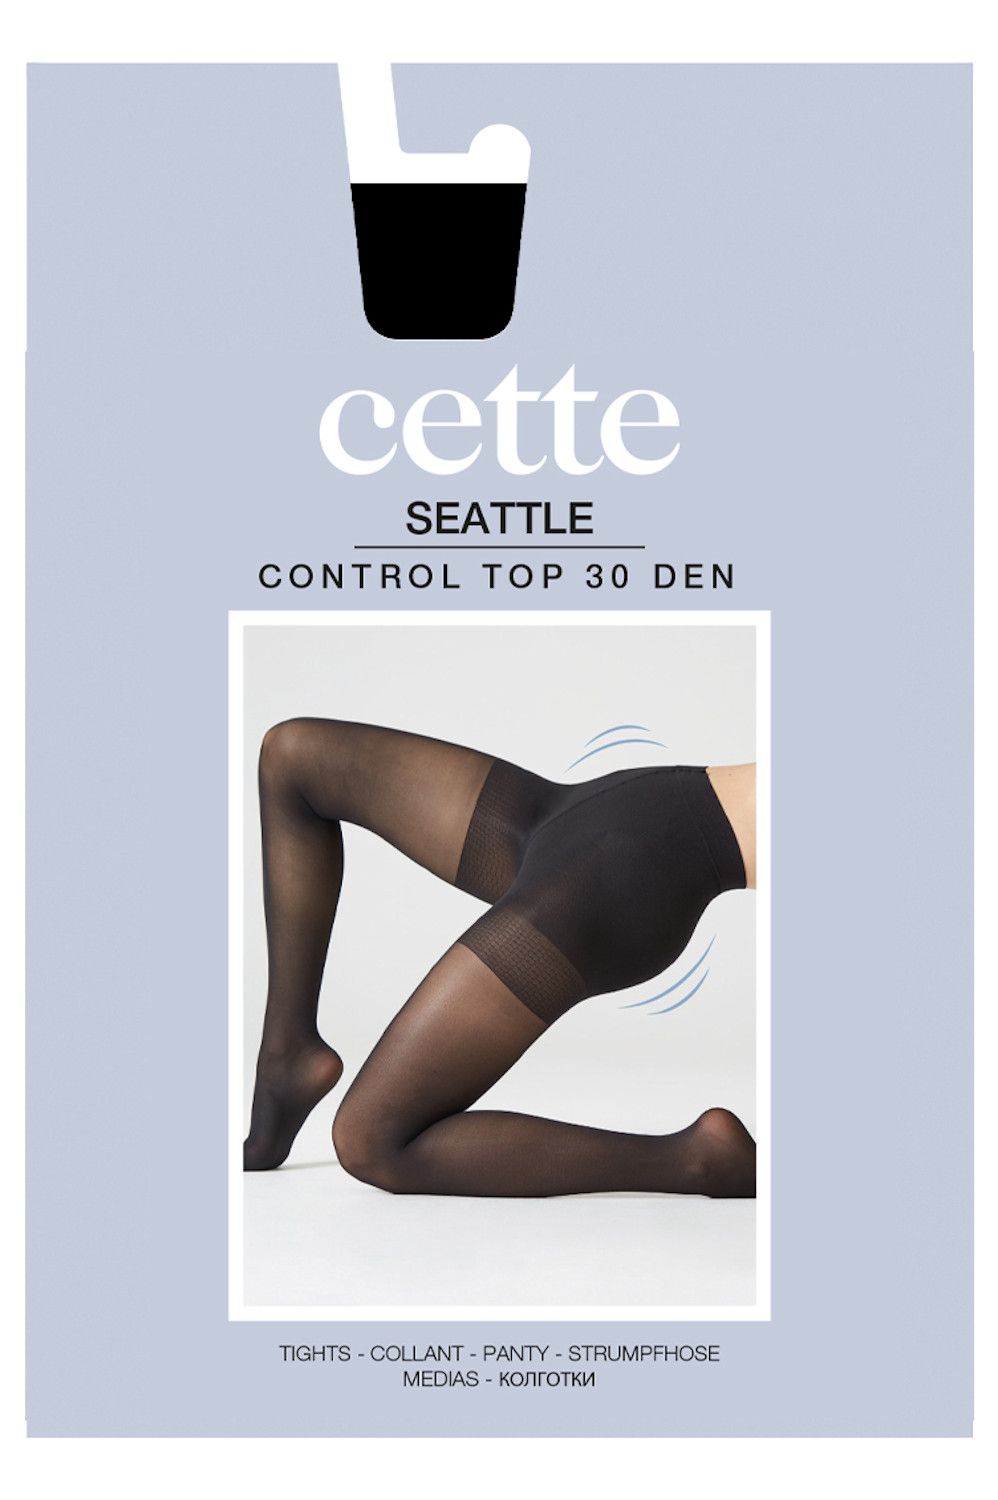 Cette Seattle Shaping Pantyhose Black 30 den  Lumingerie bras and  underwear for big busts